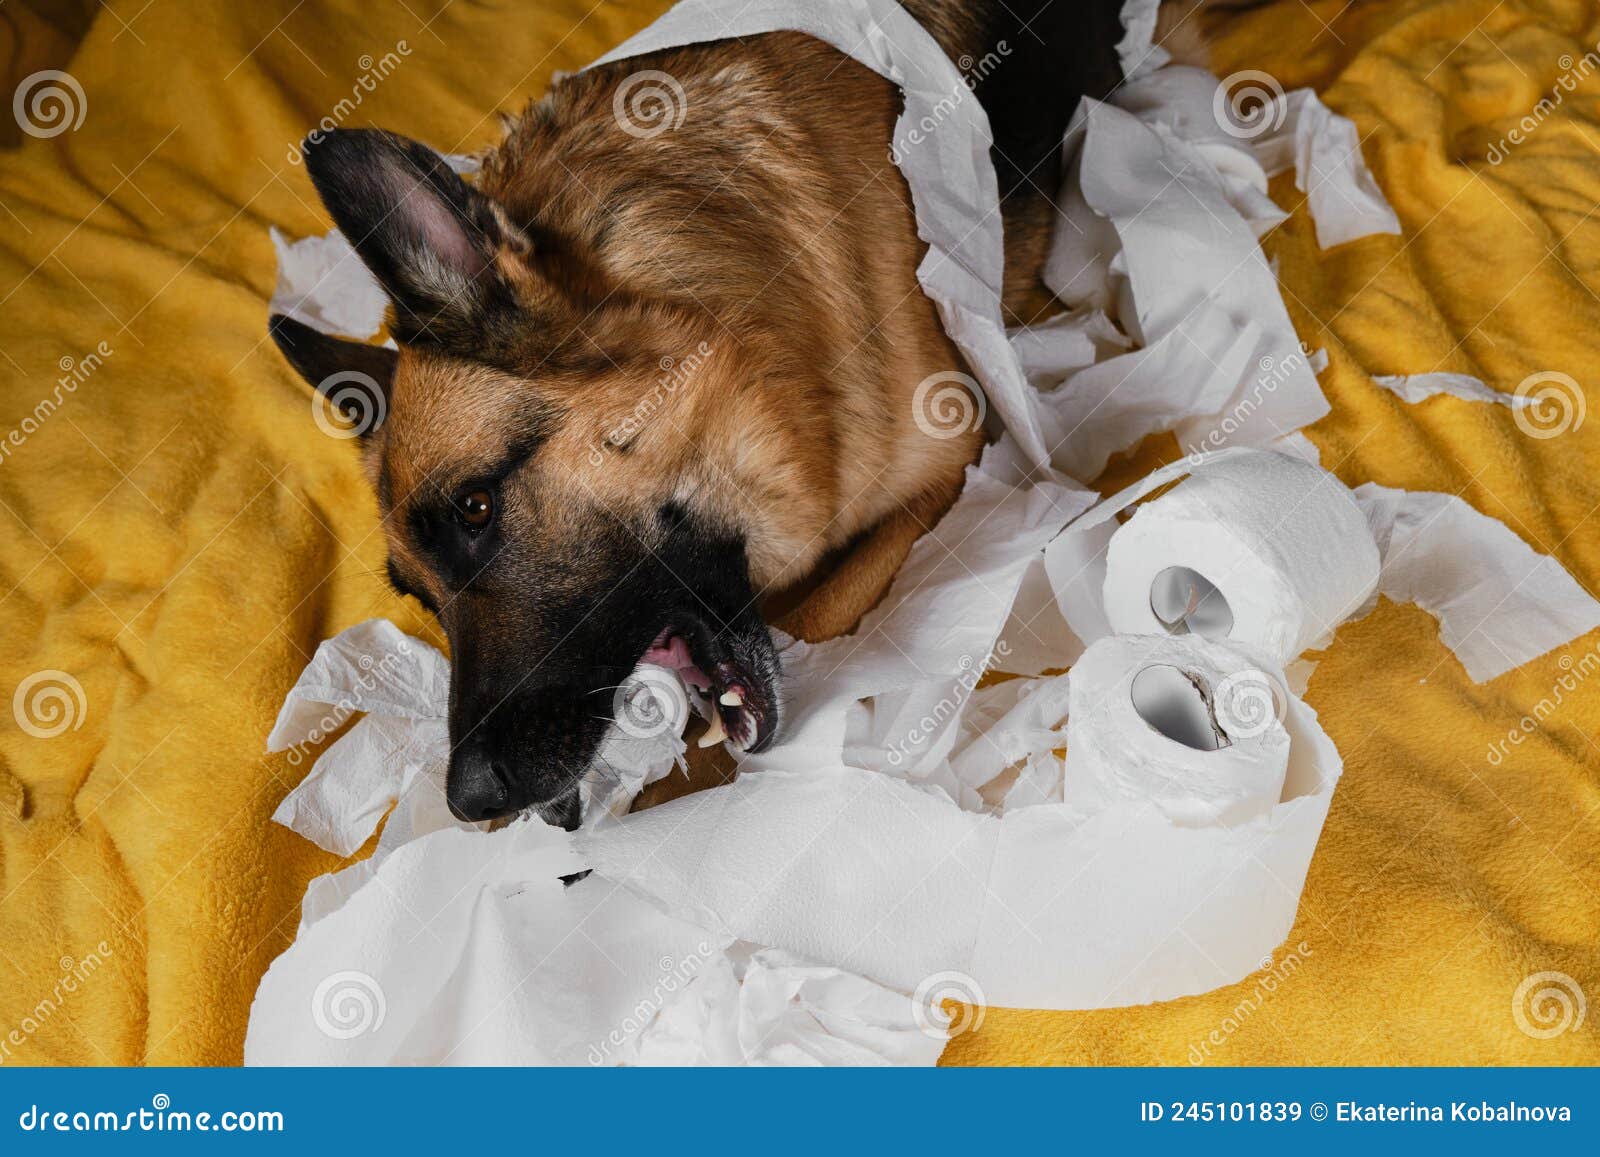 young crazy dog makes mess and rejoices. view from above. dog is alone at home entertaining by eating toilet paper. charming